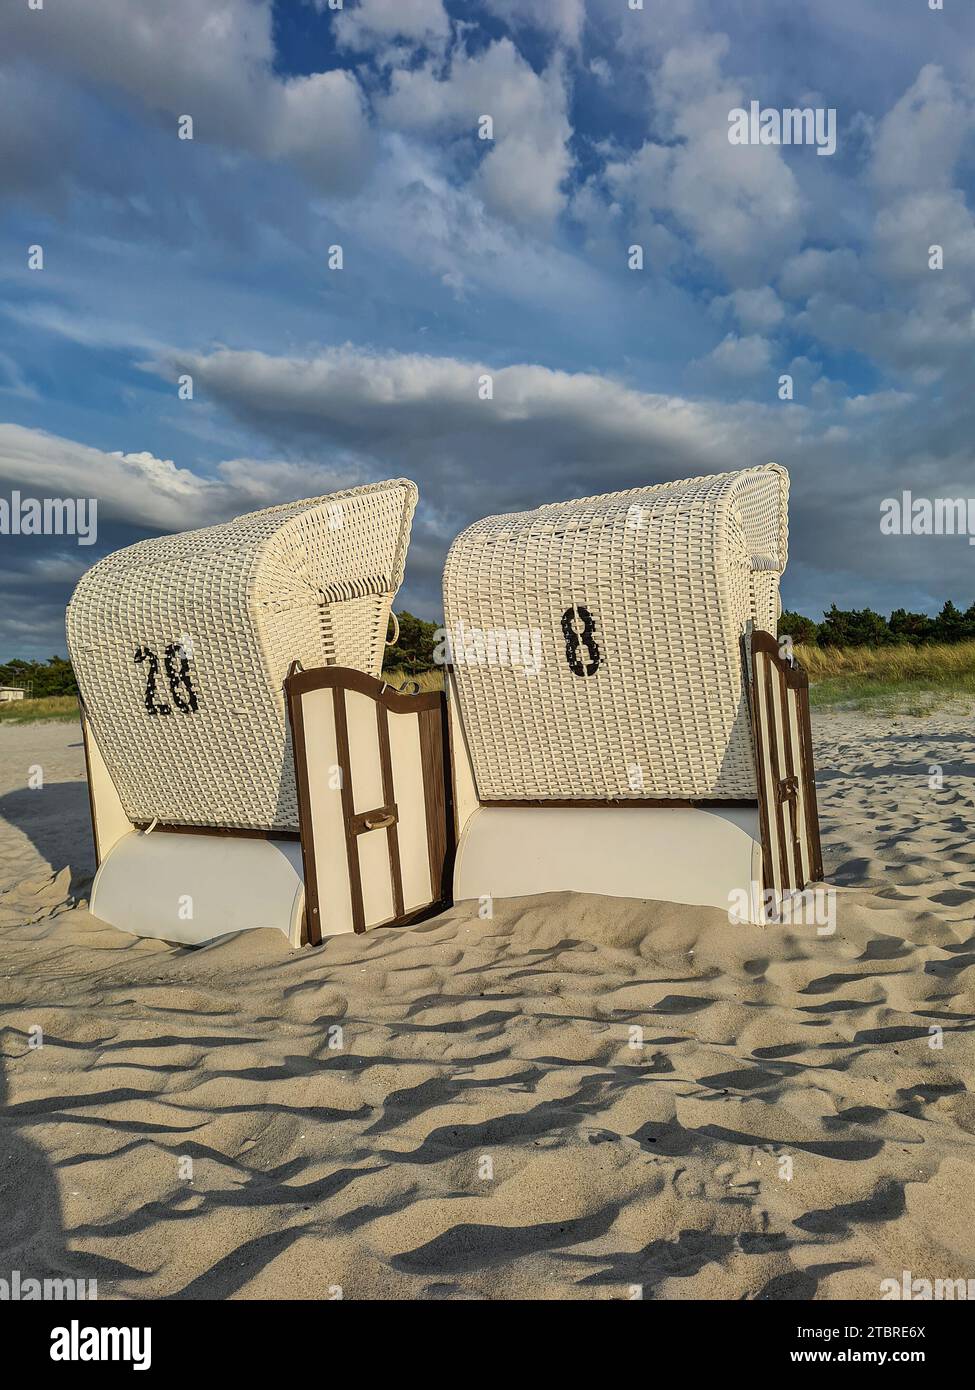 Evening atmosphere on the sandy beach, two beach chairs in the evening sun with traces in the sand, vacation resort Prerow at the Baltic Sea, peninsula Fischland-Darß-Zingst, Mecklenburg-Western Pomerania, Germany Stock Photo